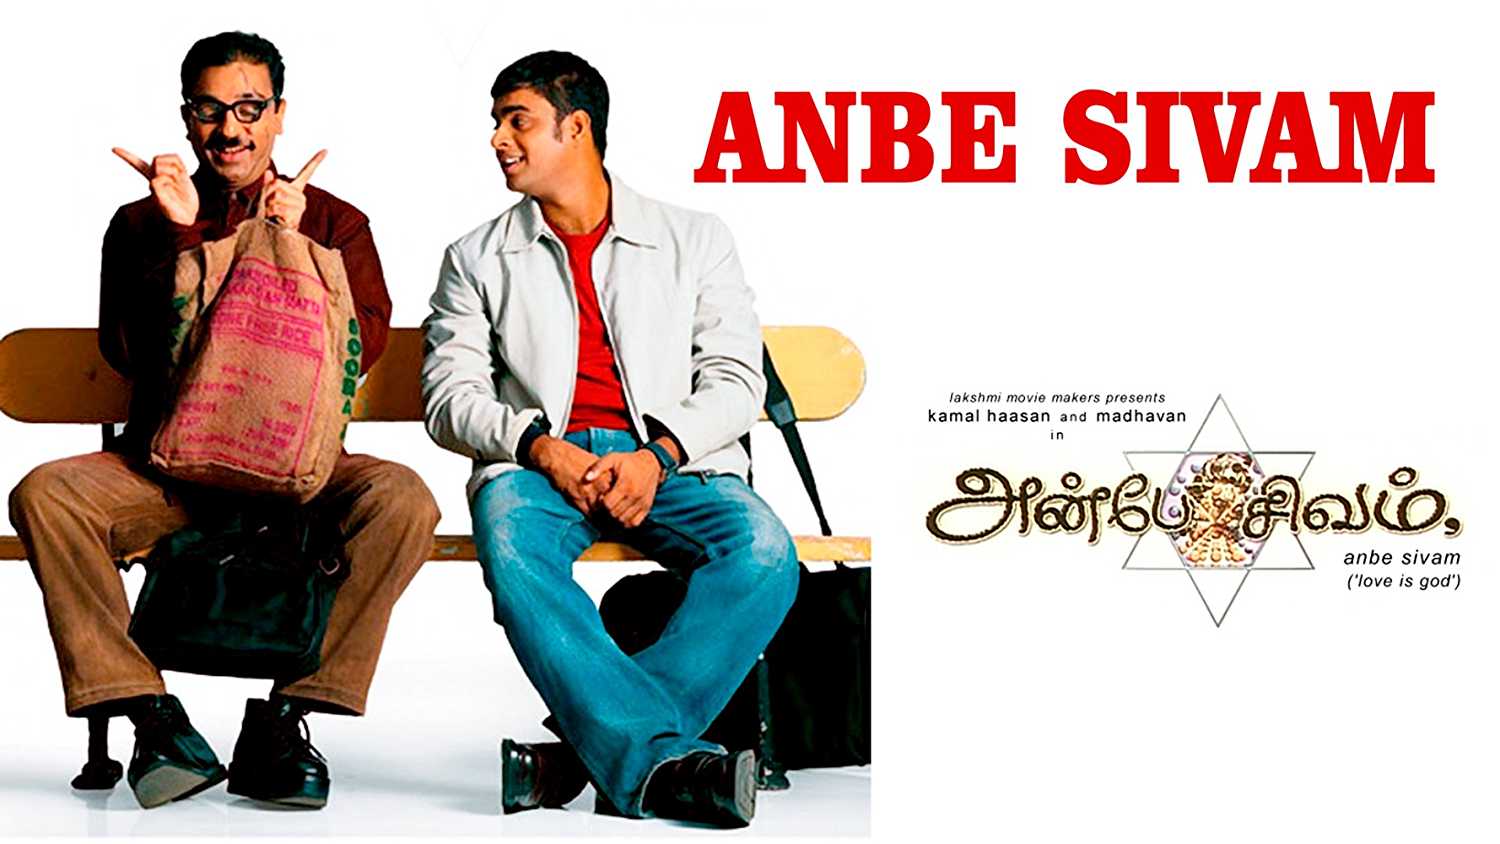 ANBE SIVAM MOVIE Photo, Image and Wallpaper